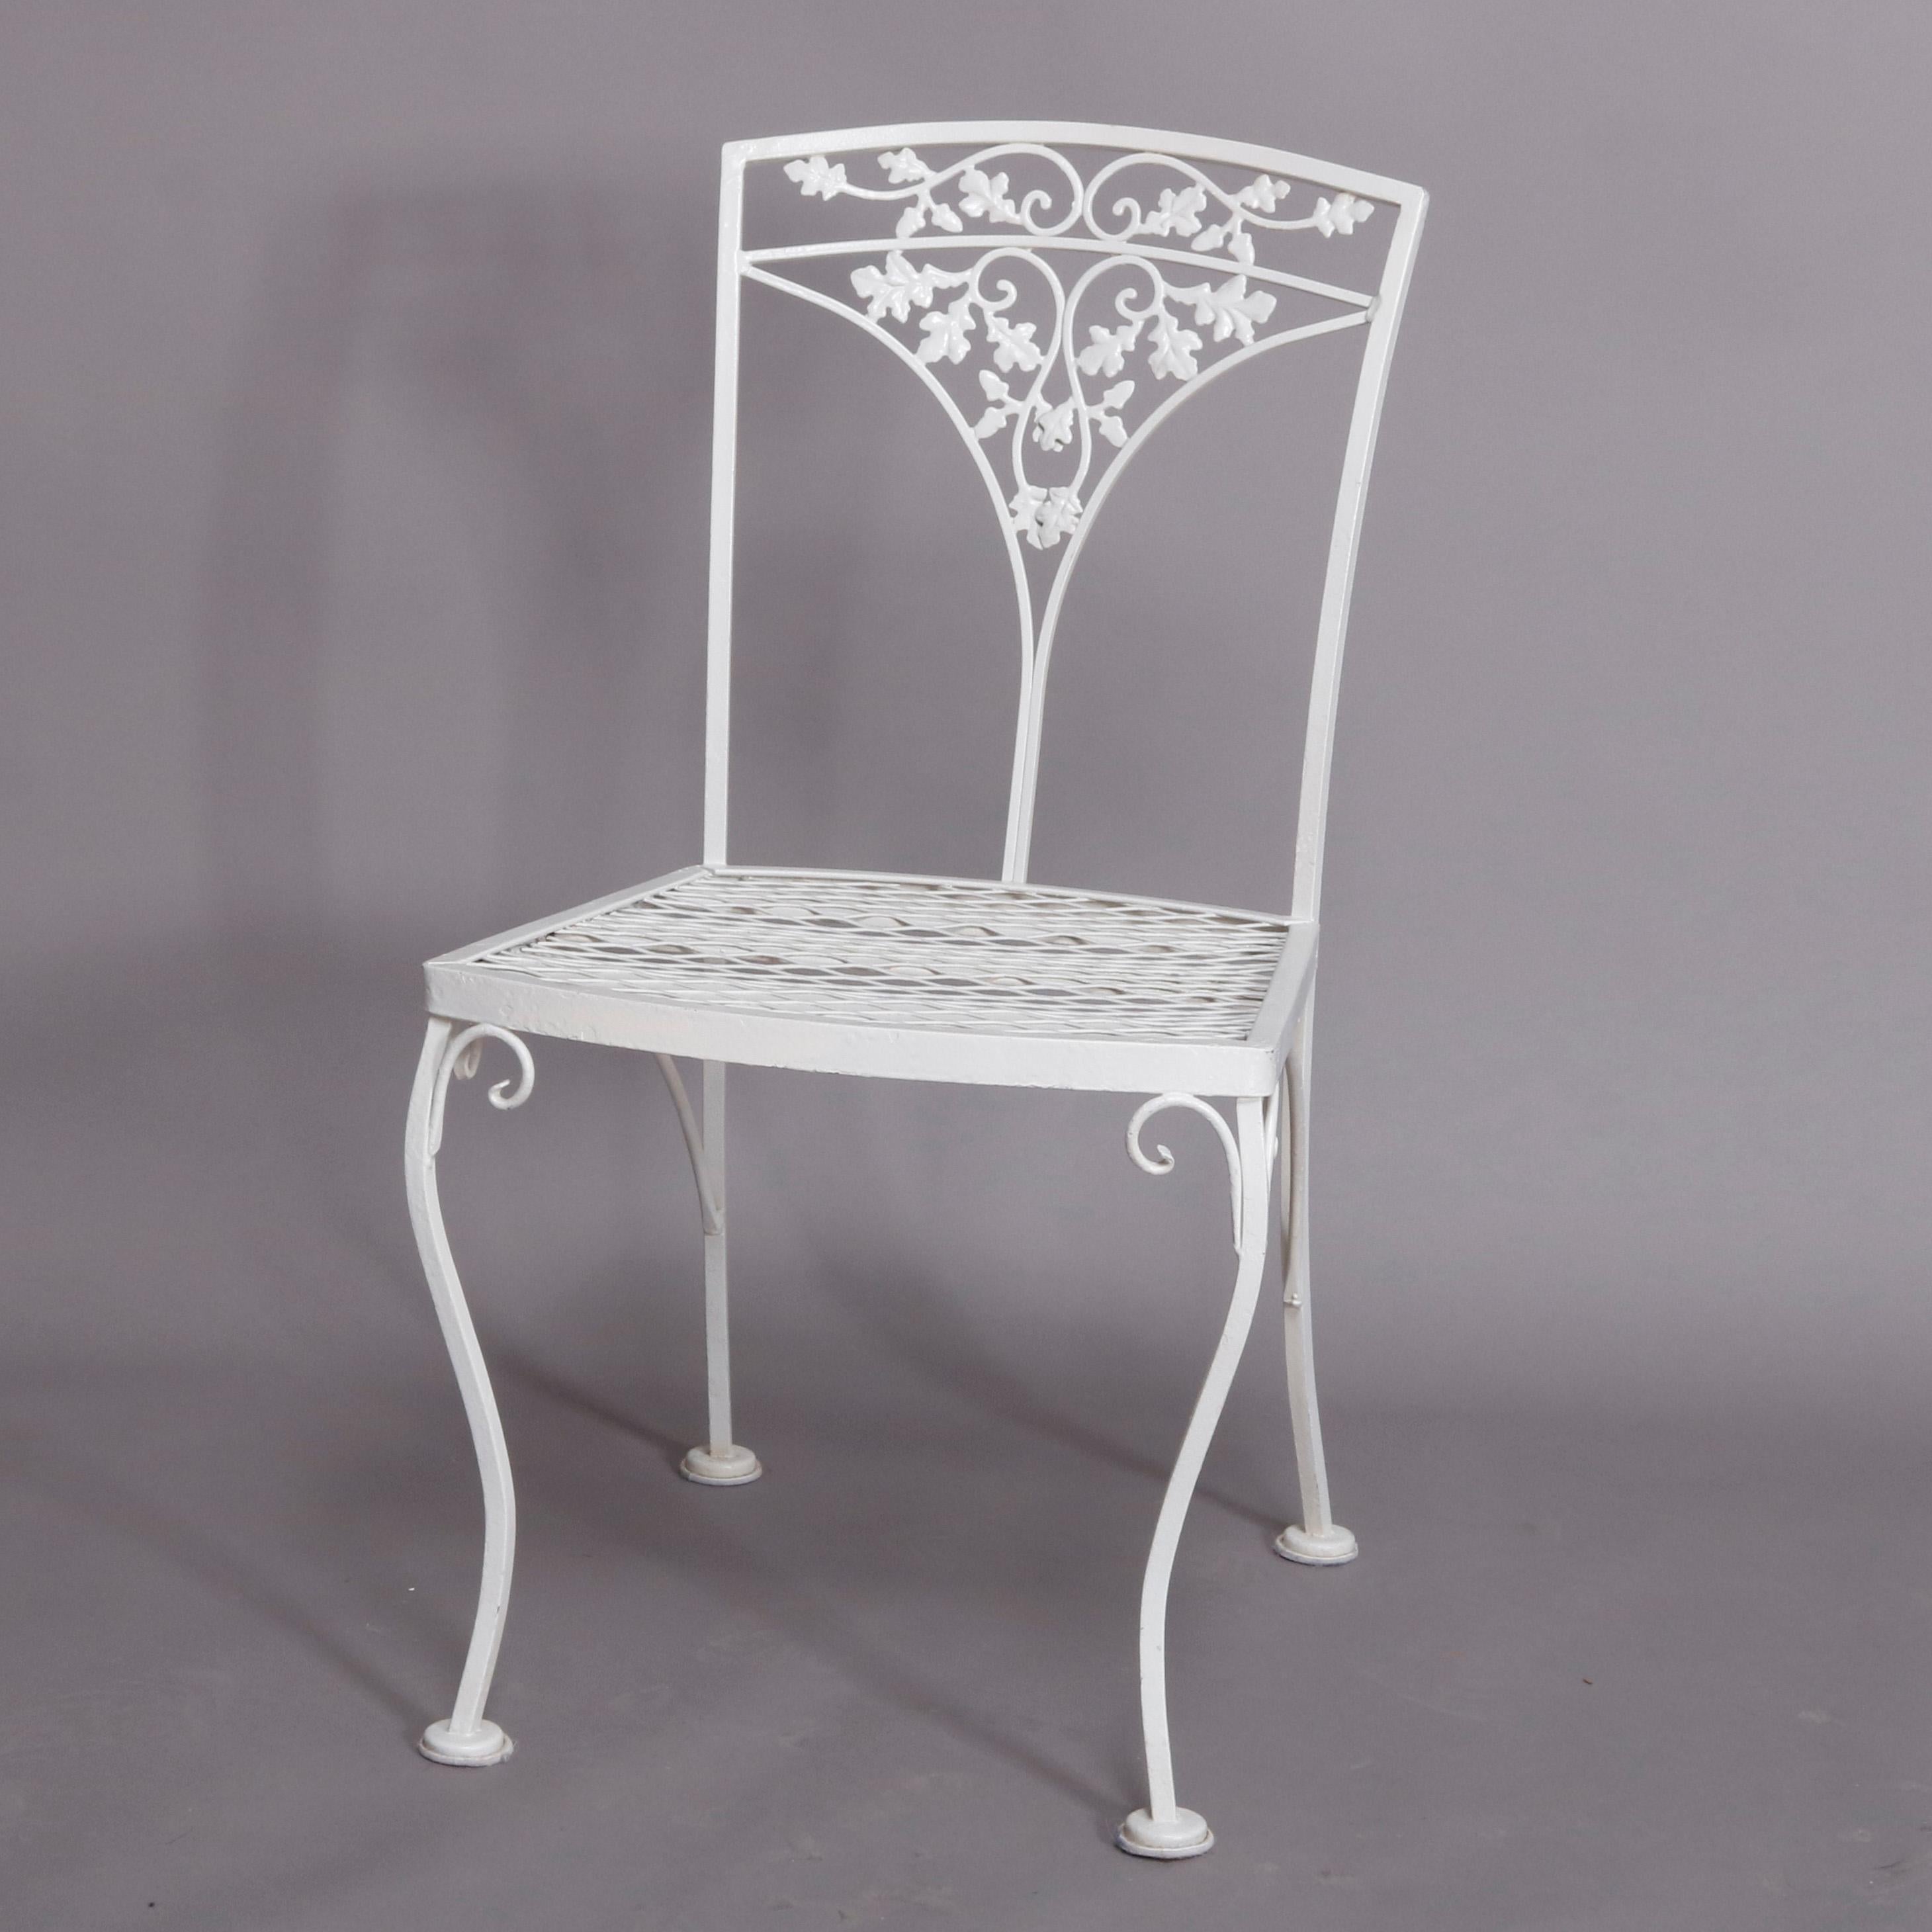 A set of 8 vintage Victorian style garden patio chairs each offer white painted wrought iron construction with open back having foliate and vine form splat over mesh seat and raised on cabriole legs with scroll corbels, 20th century

Measures: 33